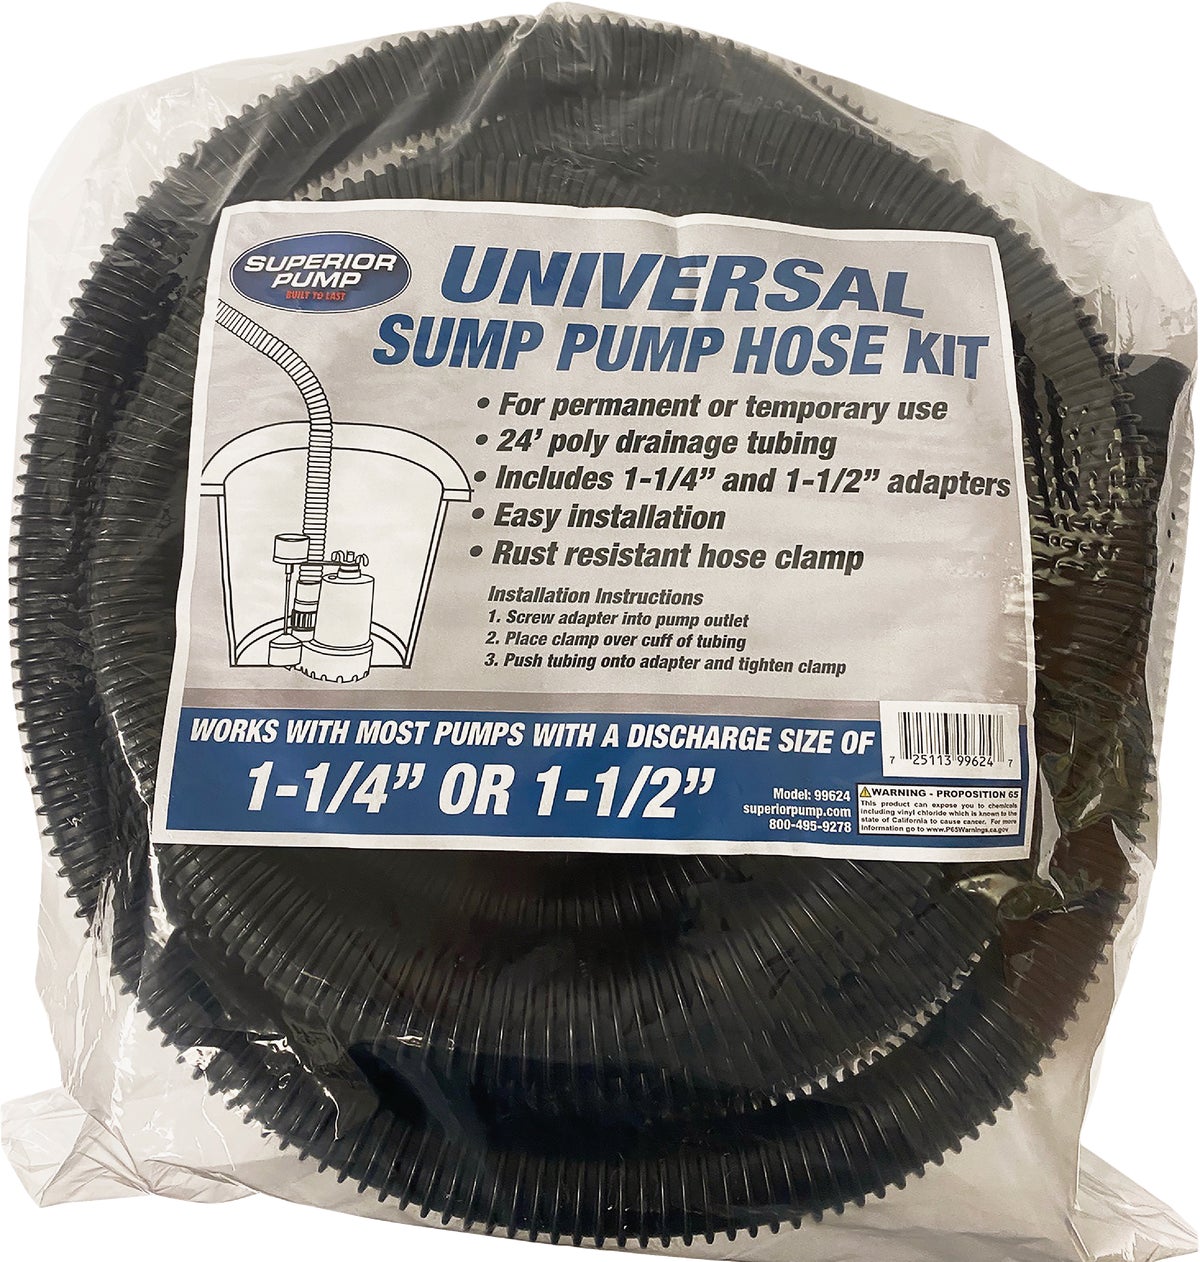 Pentair Water MP Universal Hose Kit 112444 Sump Pump Accessories for sale online 